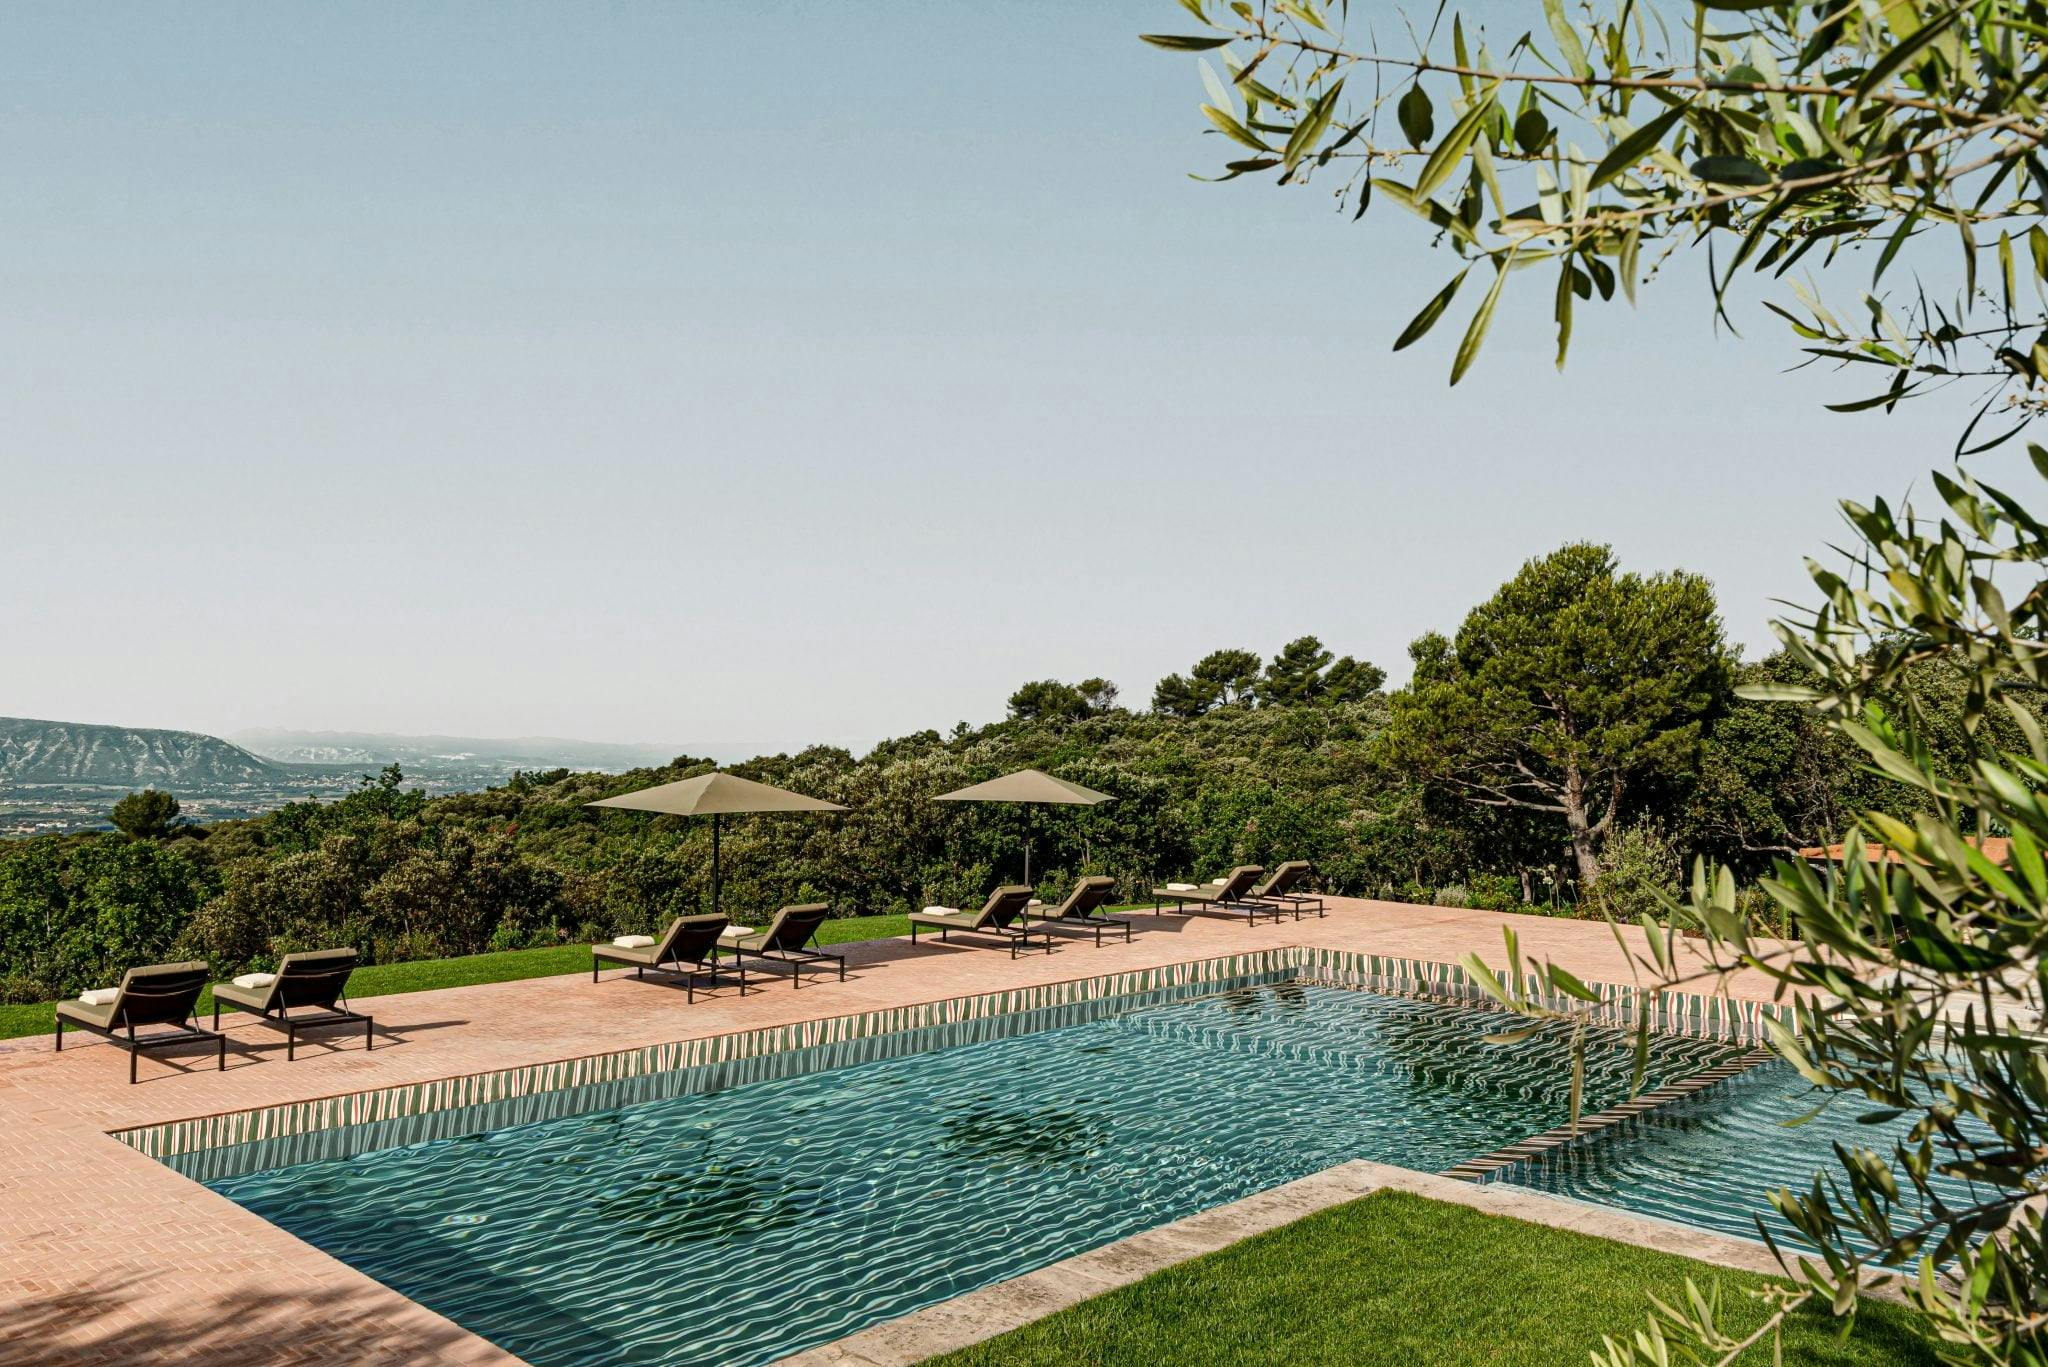 The pool with a view of the Luberon at the fourth property of Iconic House, Les Hauts de Gordes.